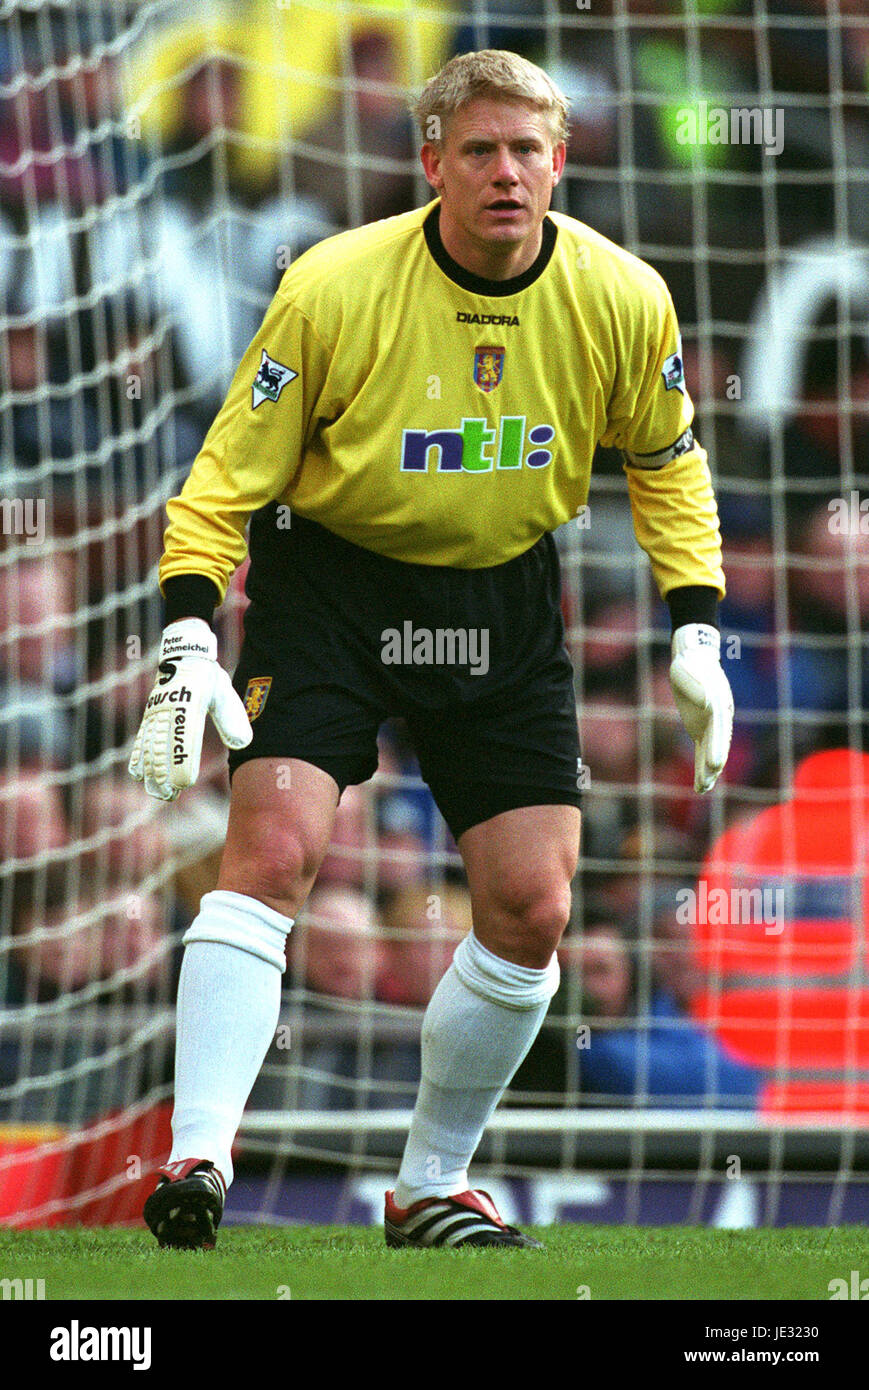 PETER SCHMEICHEL ASTON VILLA FC MANCHESTER OLD TRAFORD MANCHESTER 23  February 2002 Stock Photo - Alamy